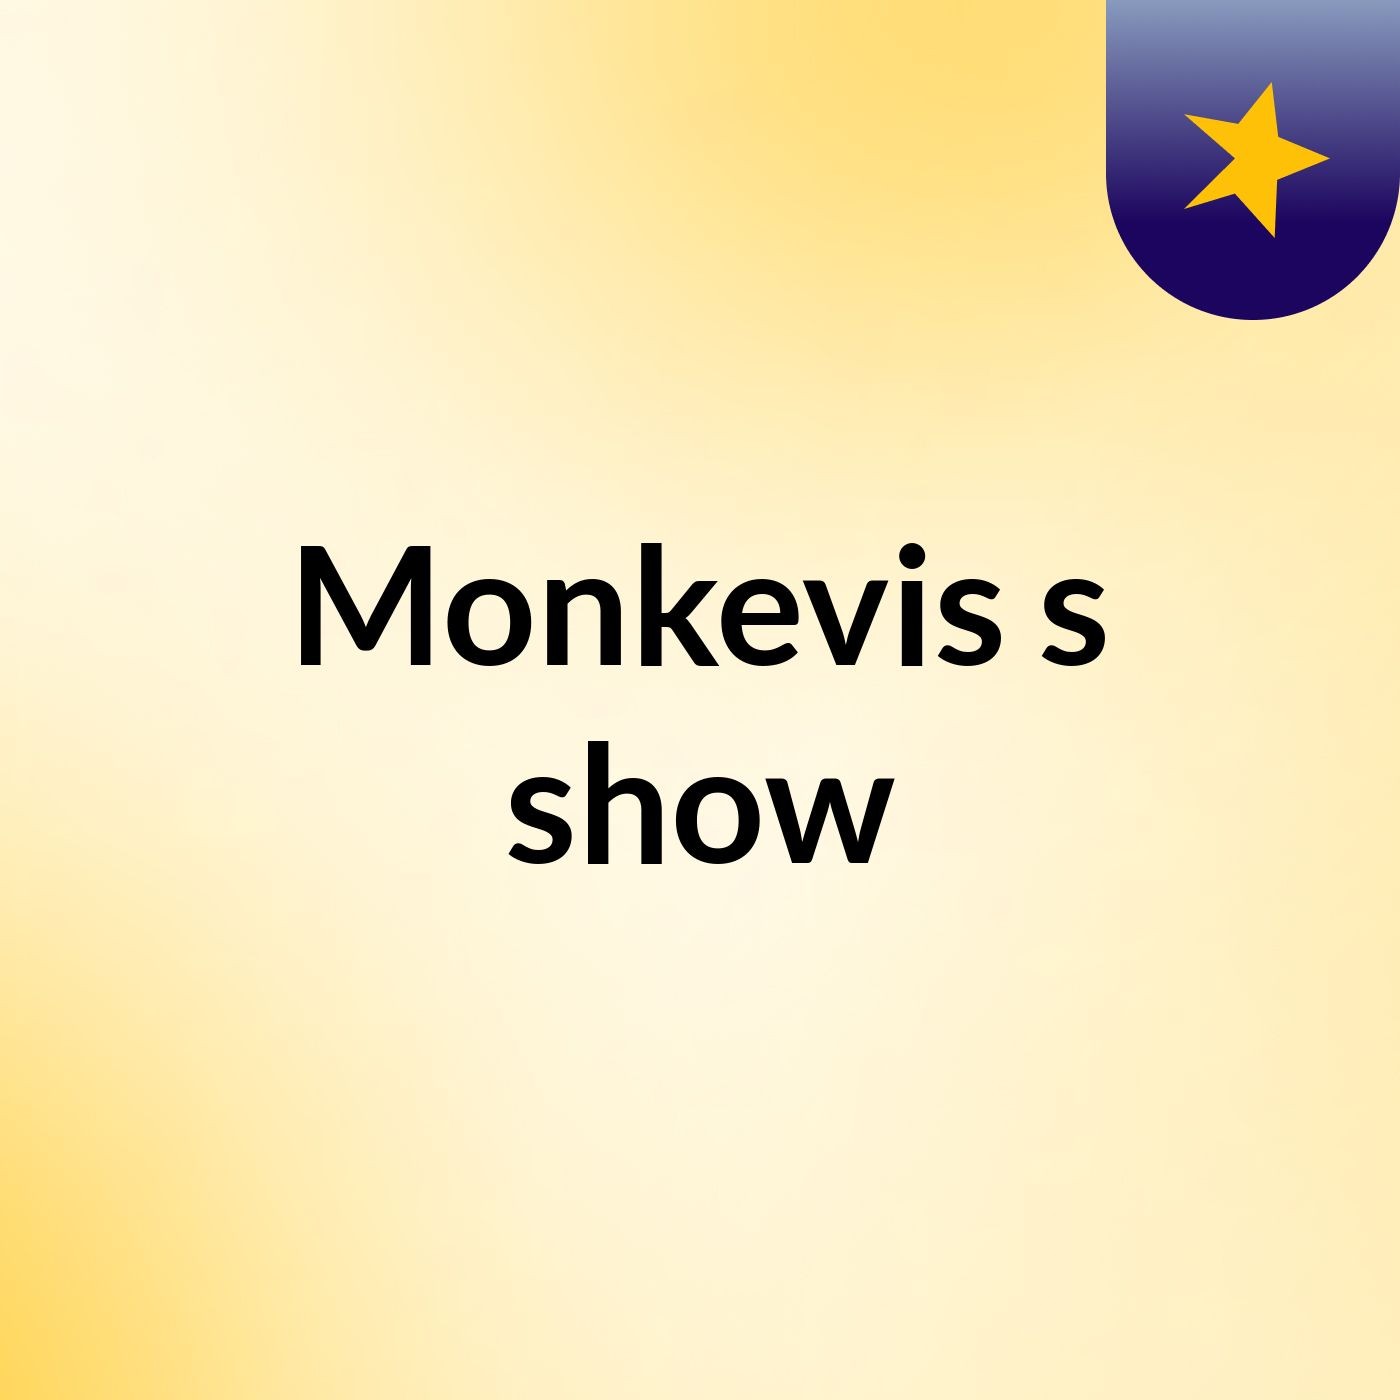 Monkevis's show